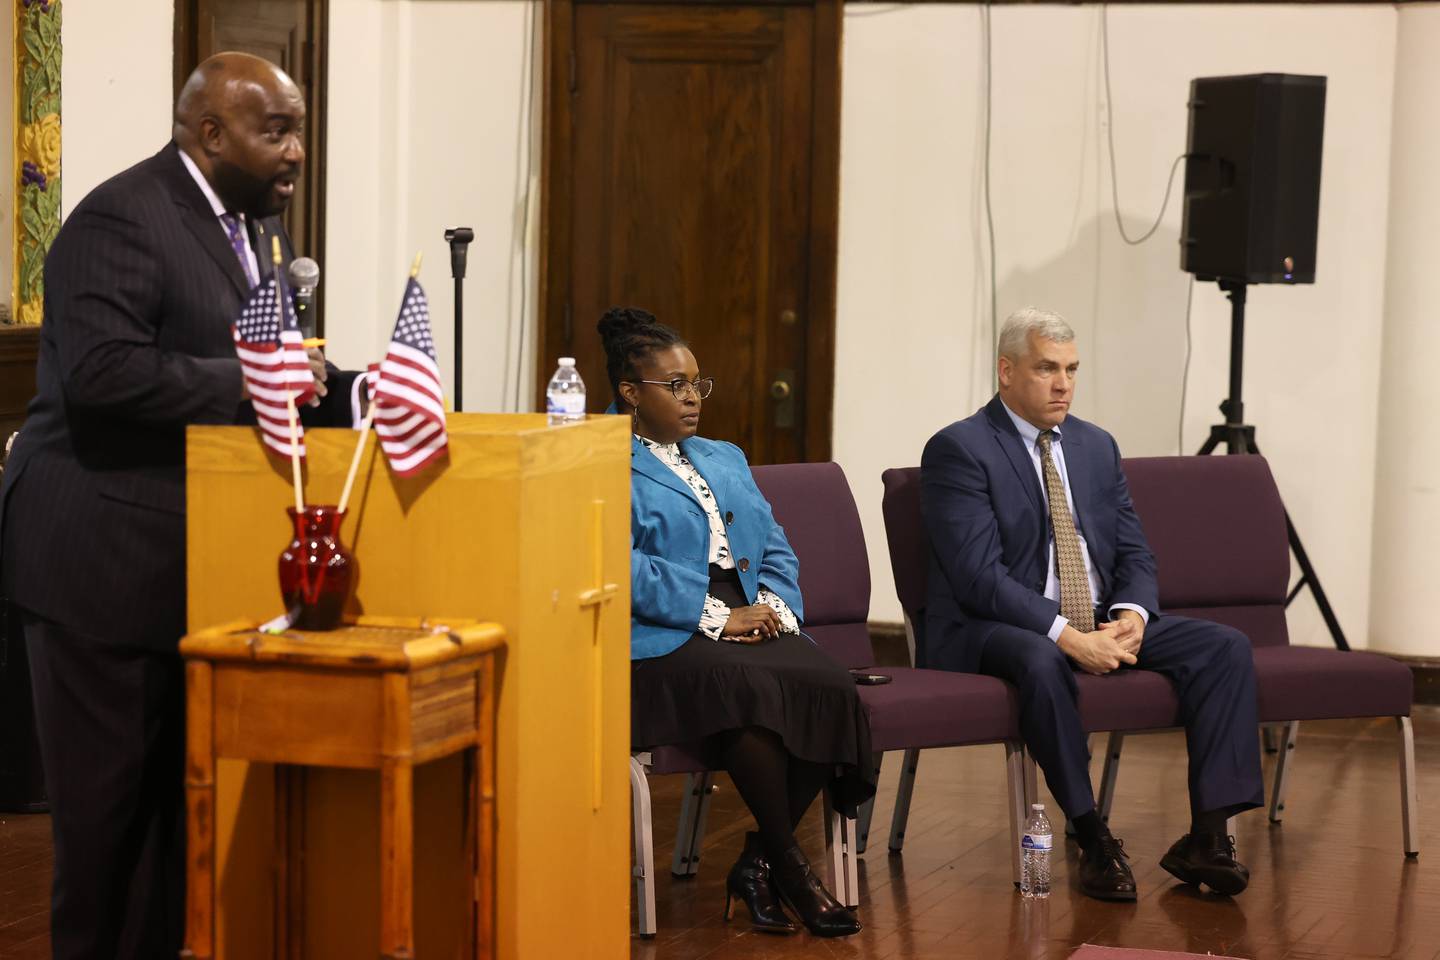 Joliet mayor candidate Tycee Bell (center) and Mayor Bob O’Dekirk attend a moderated mayoral candidate forum at New Canaanland Christian Church in Joliet on Saturday, March 25, 2023 in Joliet.